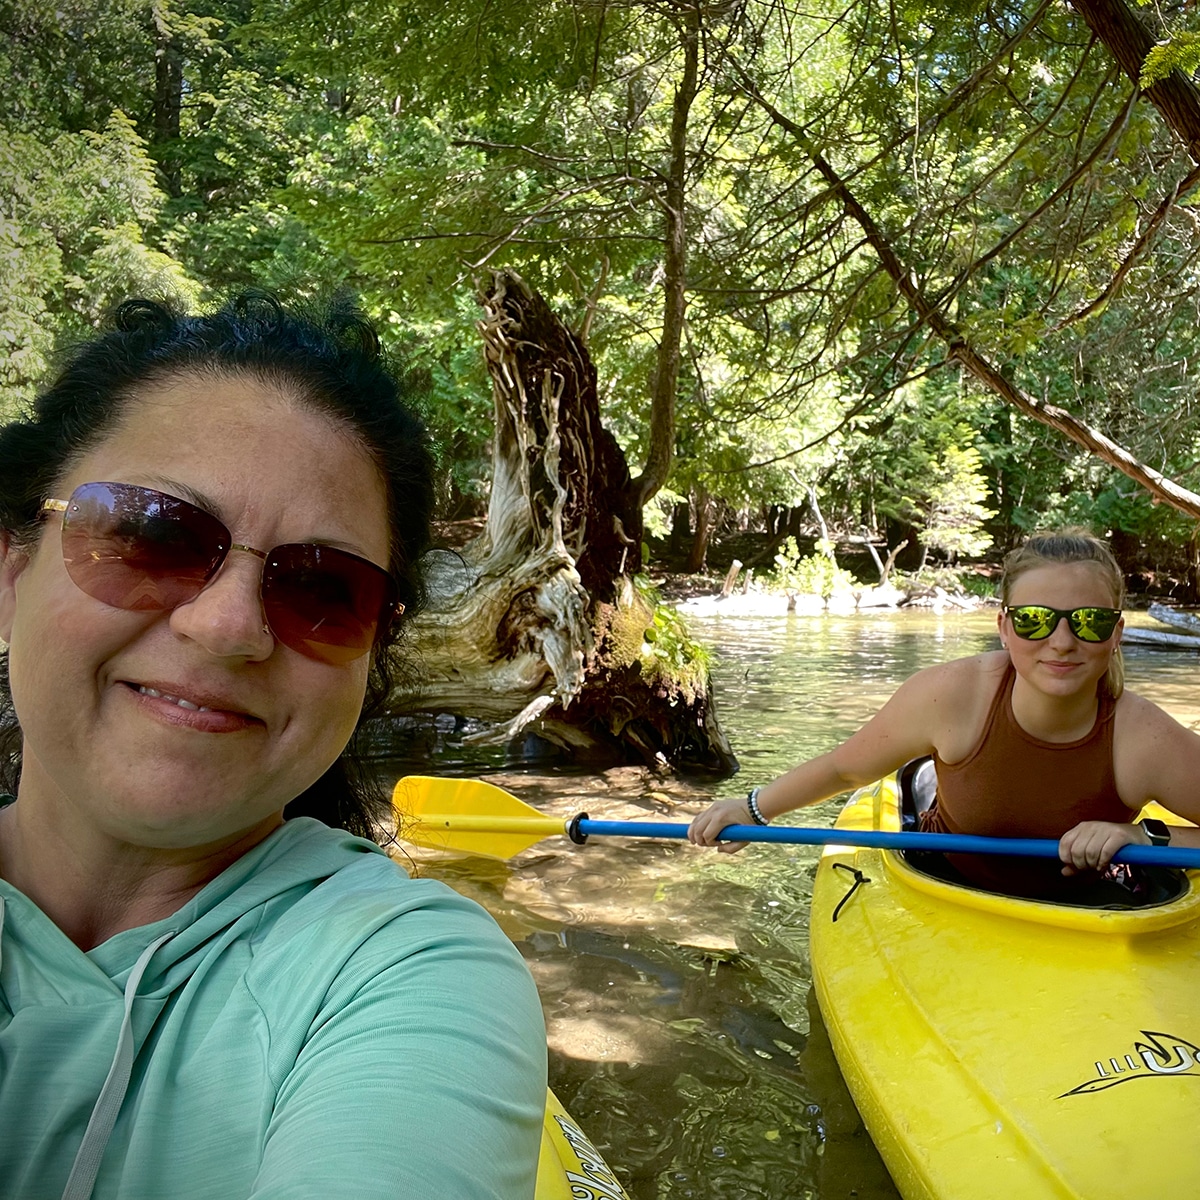 Me and my niece kayaking down the Crystal River in Glen Arbor Michigan.